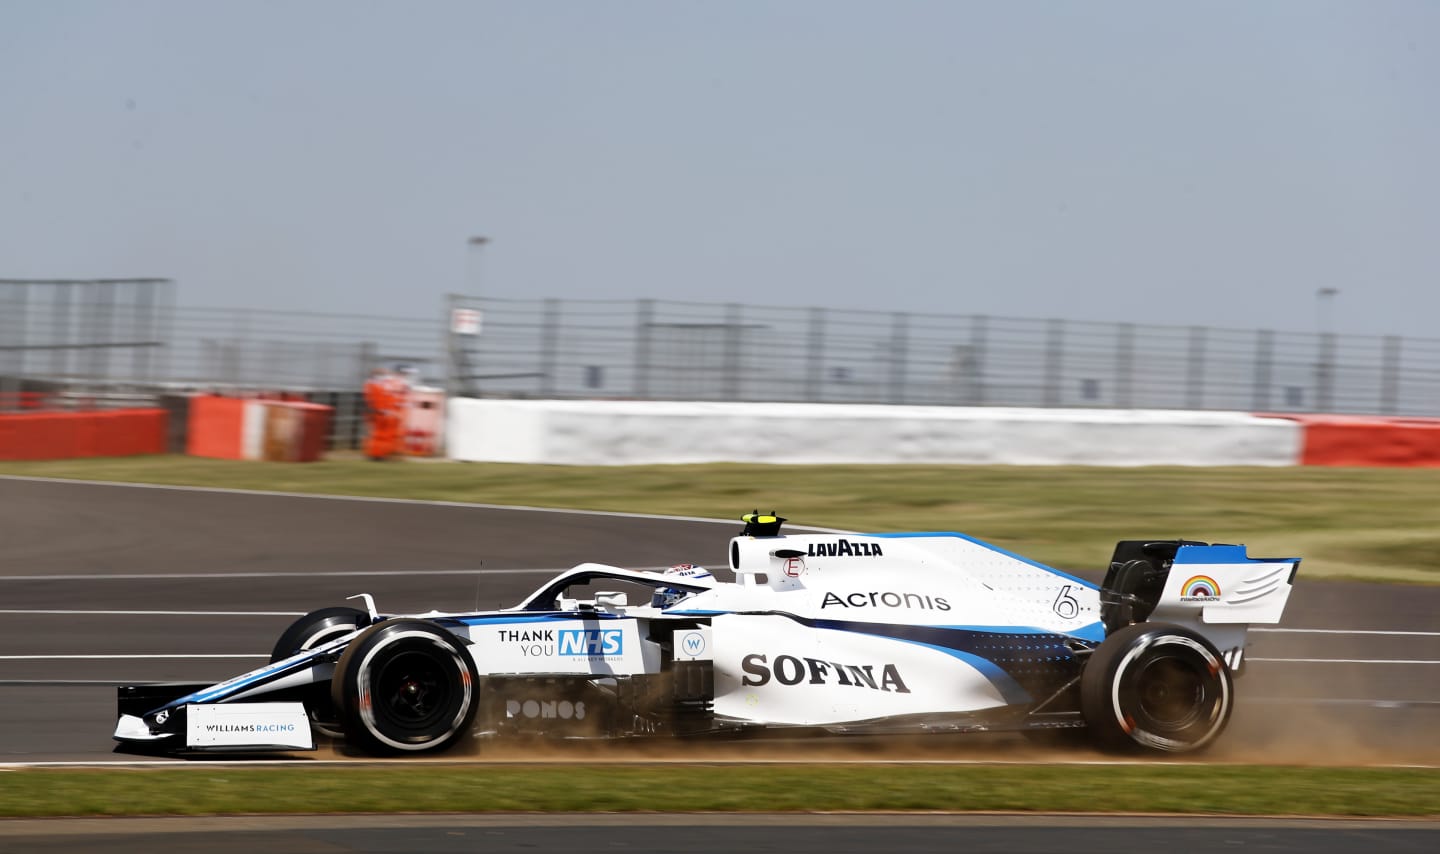 NORTHAMPTON, ENGLAND - JULY 31: Nicholas Latifi of Canada driving the (6) Williams Racing FW43 Mercedes on track during practice for the F1 Grand Prix of Great Britain at Silverstone on July 31, 2020 in Northampton, England. (Photo by Andrew Boyers/Pool via Getty Image)